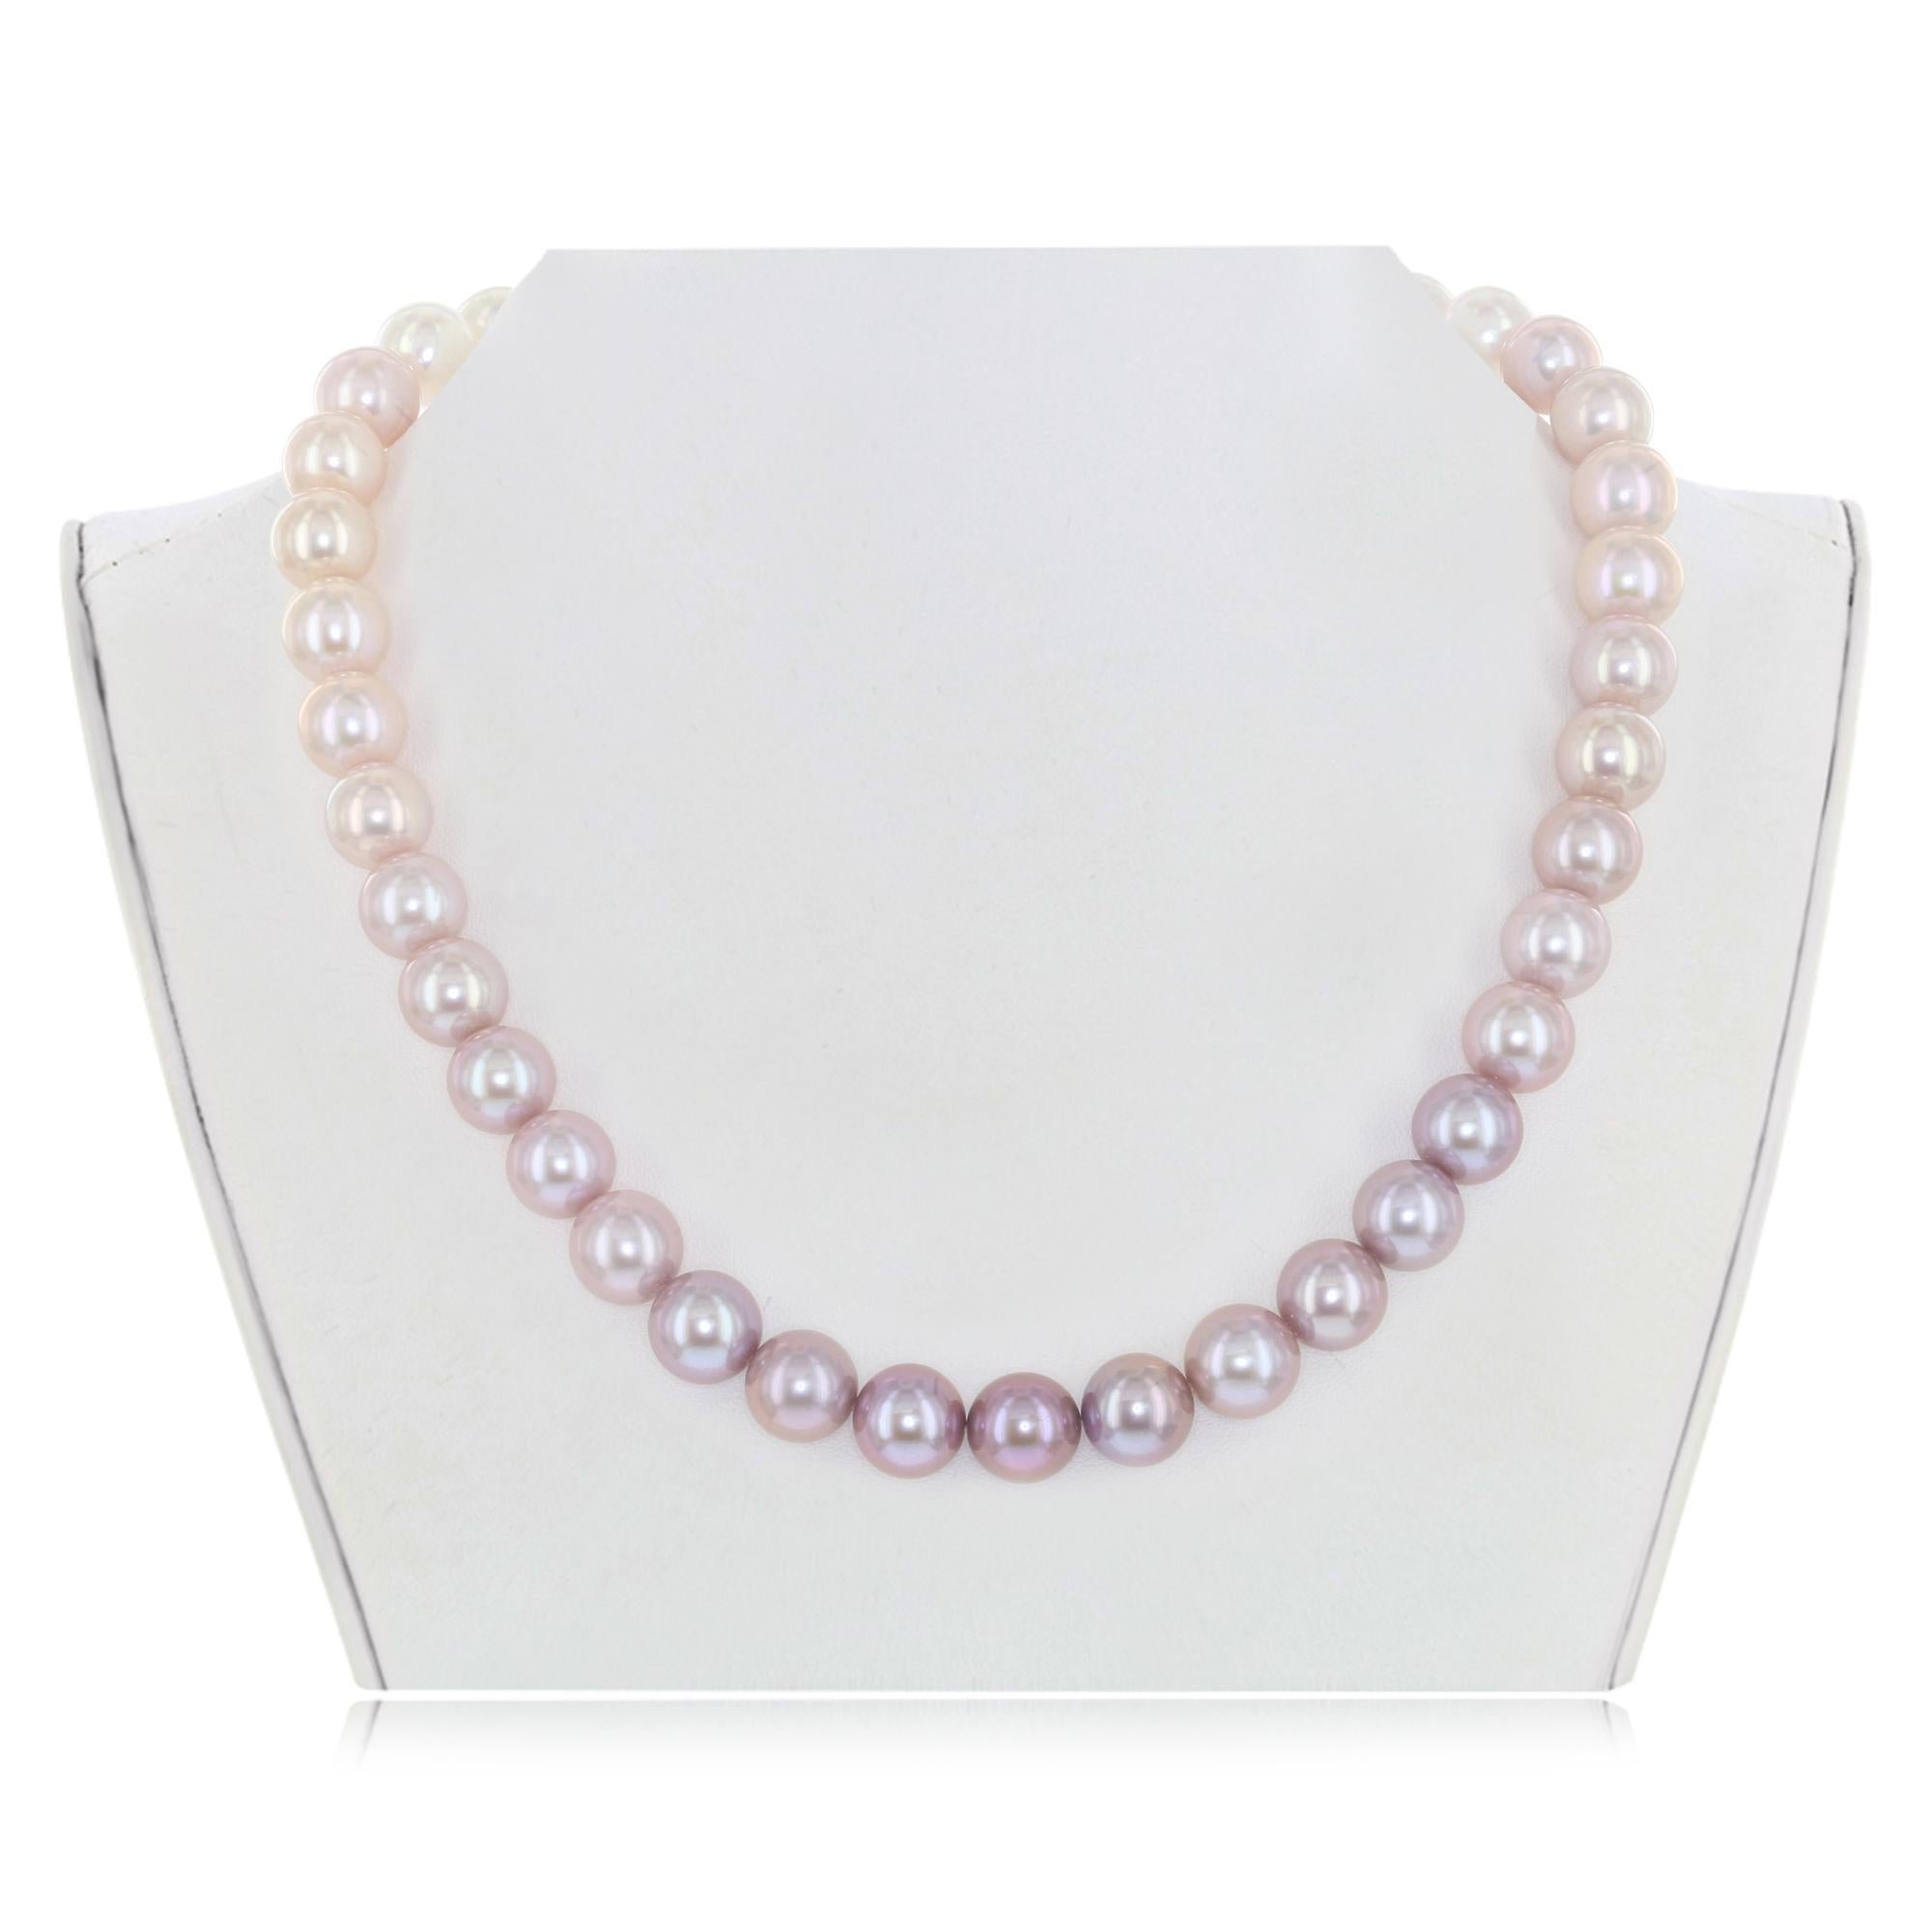 This exquisite ombre Chinese freshwater cultured round pearl necklace graduates from white at the ends to natural color pink in the center. The distinctive, lustrous pearls measure 10-11mm. This necklace features an elegant 14K white gold